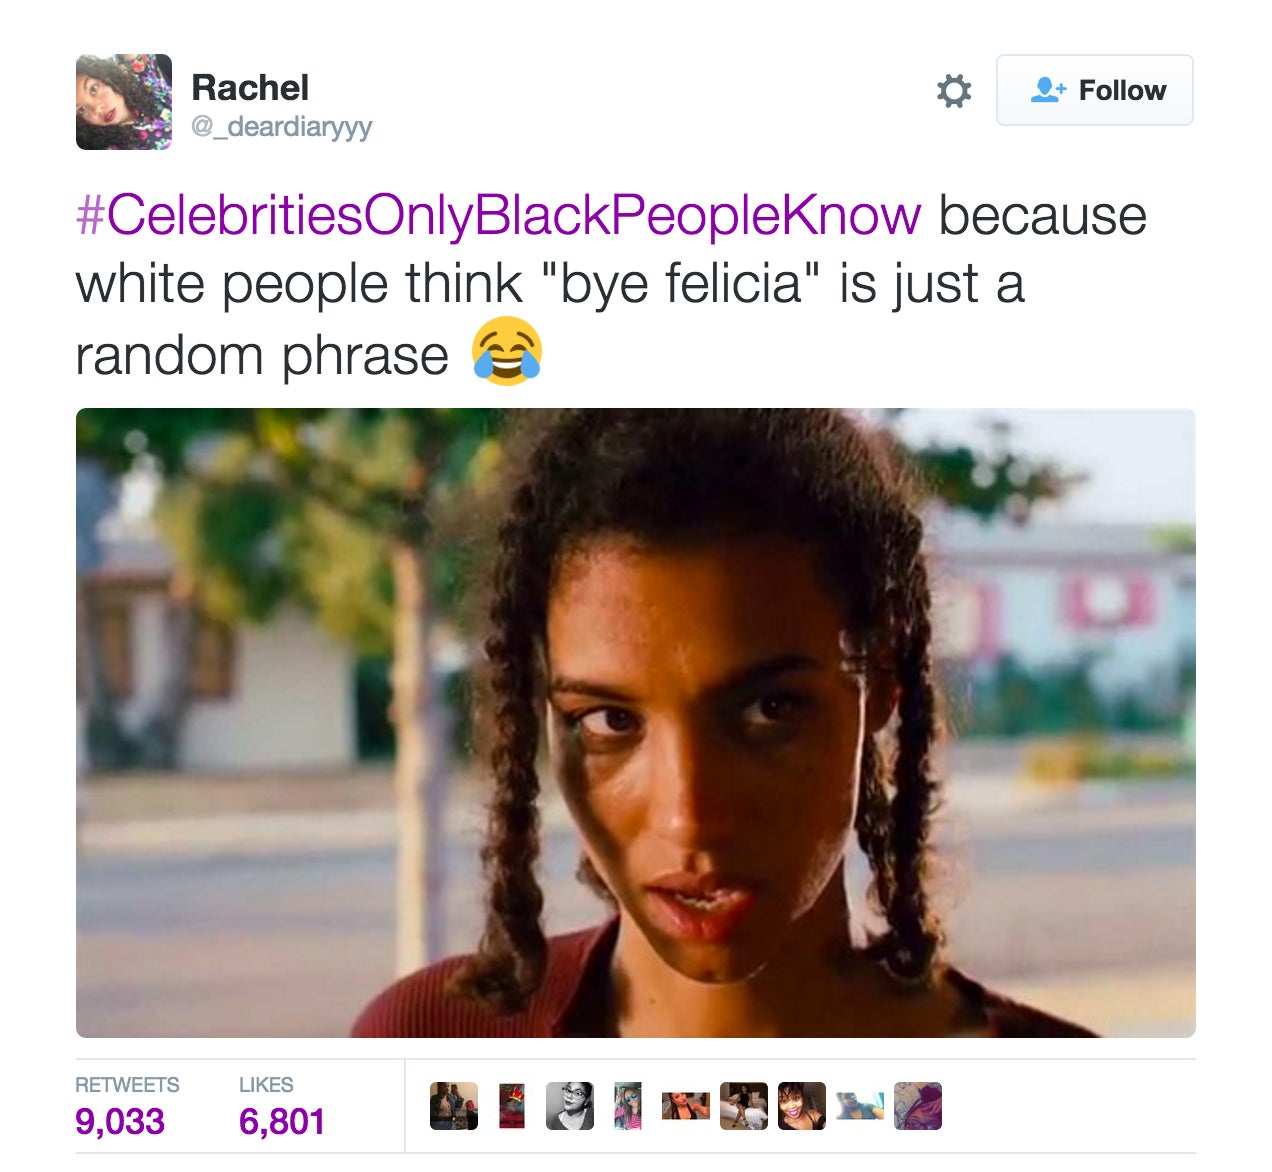 23 Most Memorable Black Twitter Hashtags of 2015
